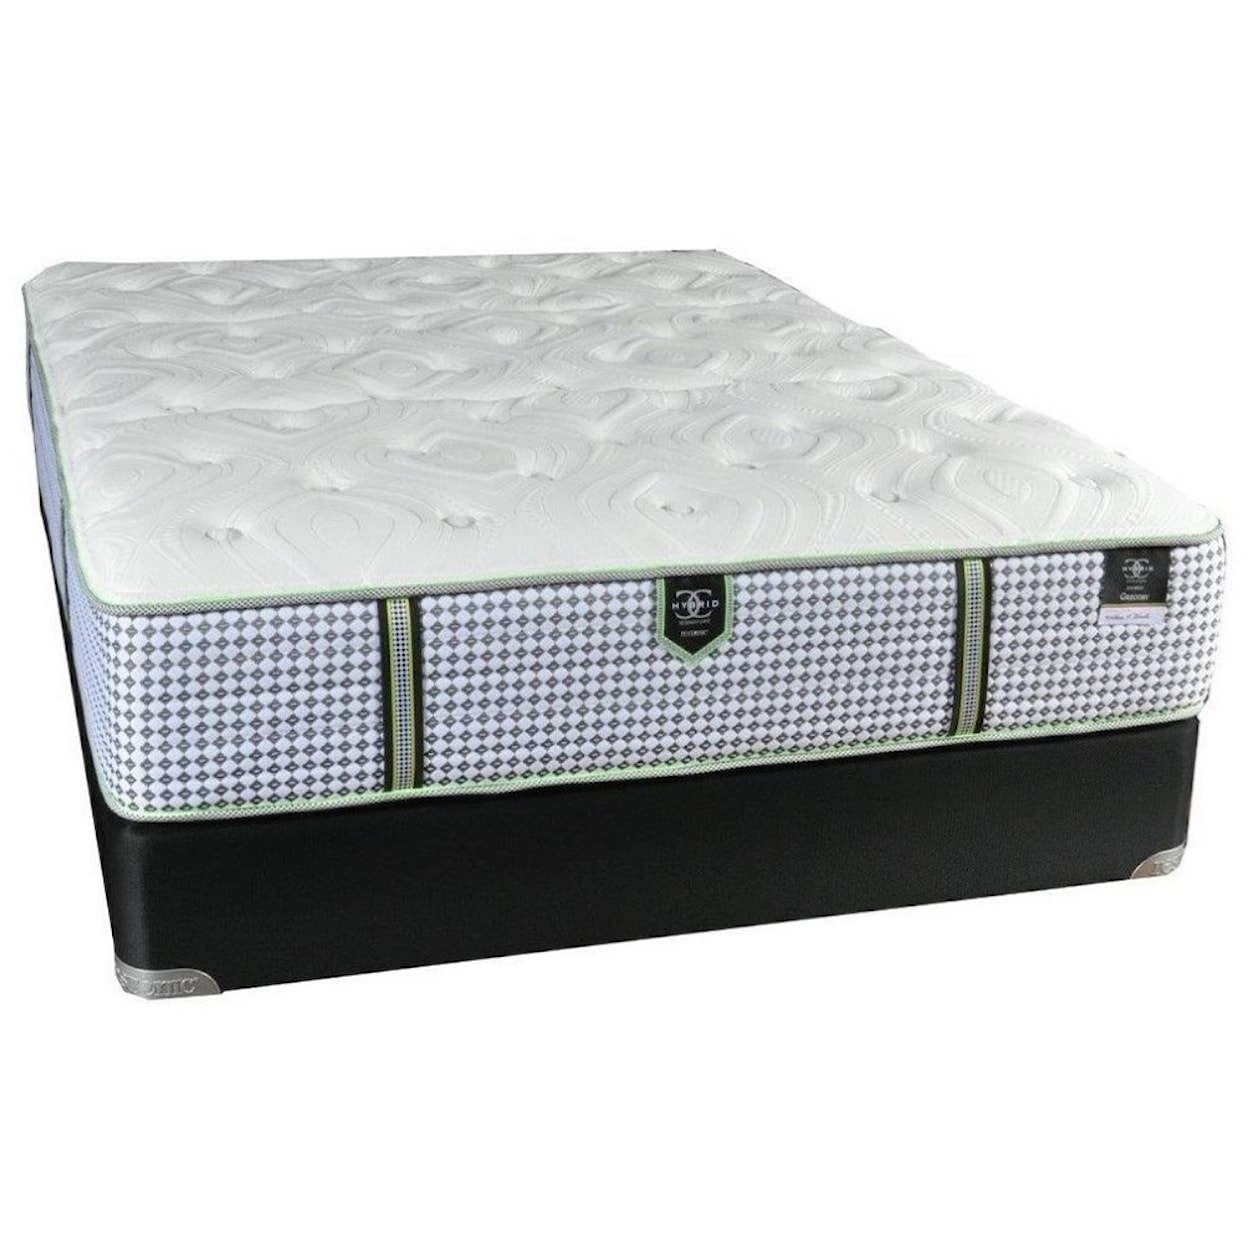 Restonic Gregory Firm King Pocketed Coil Mattress Set